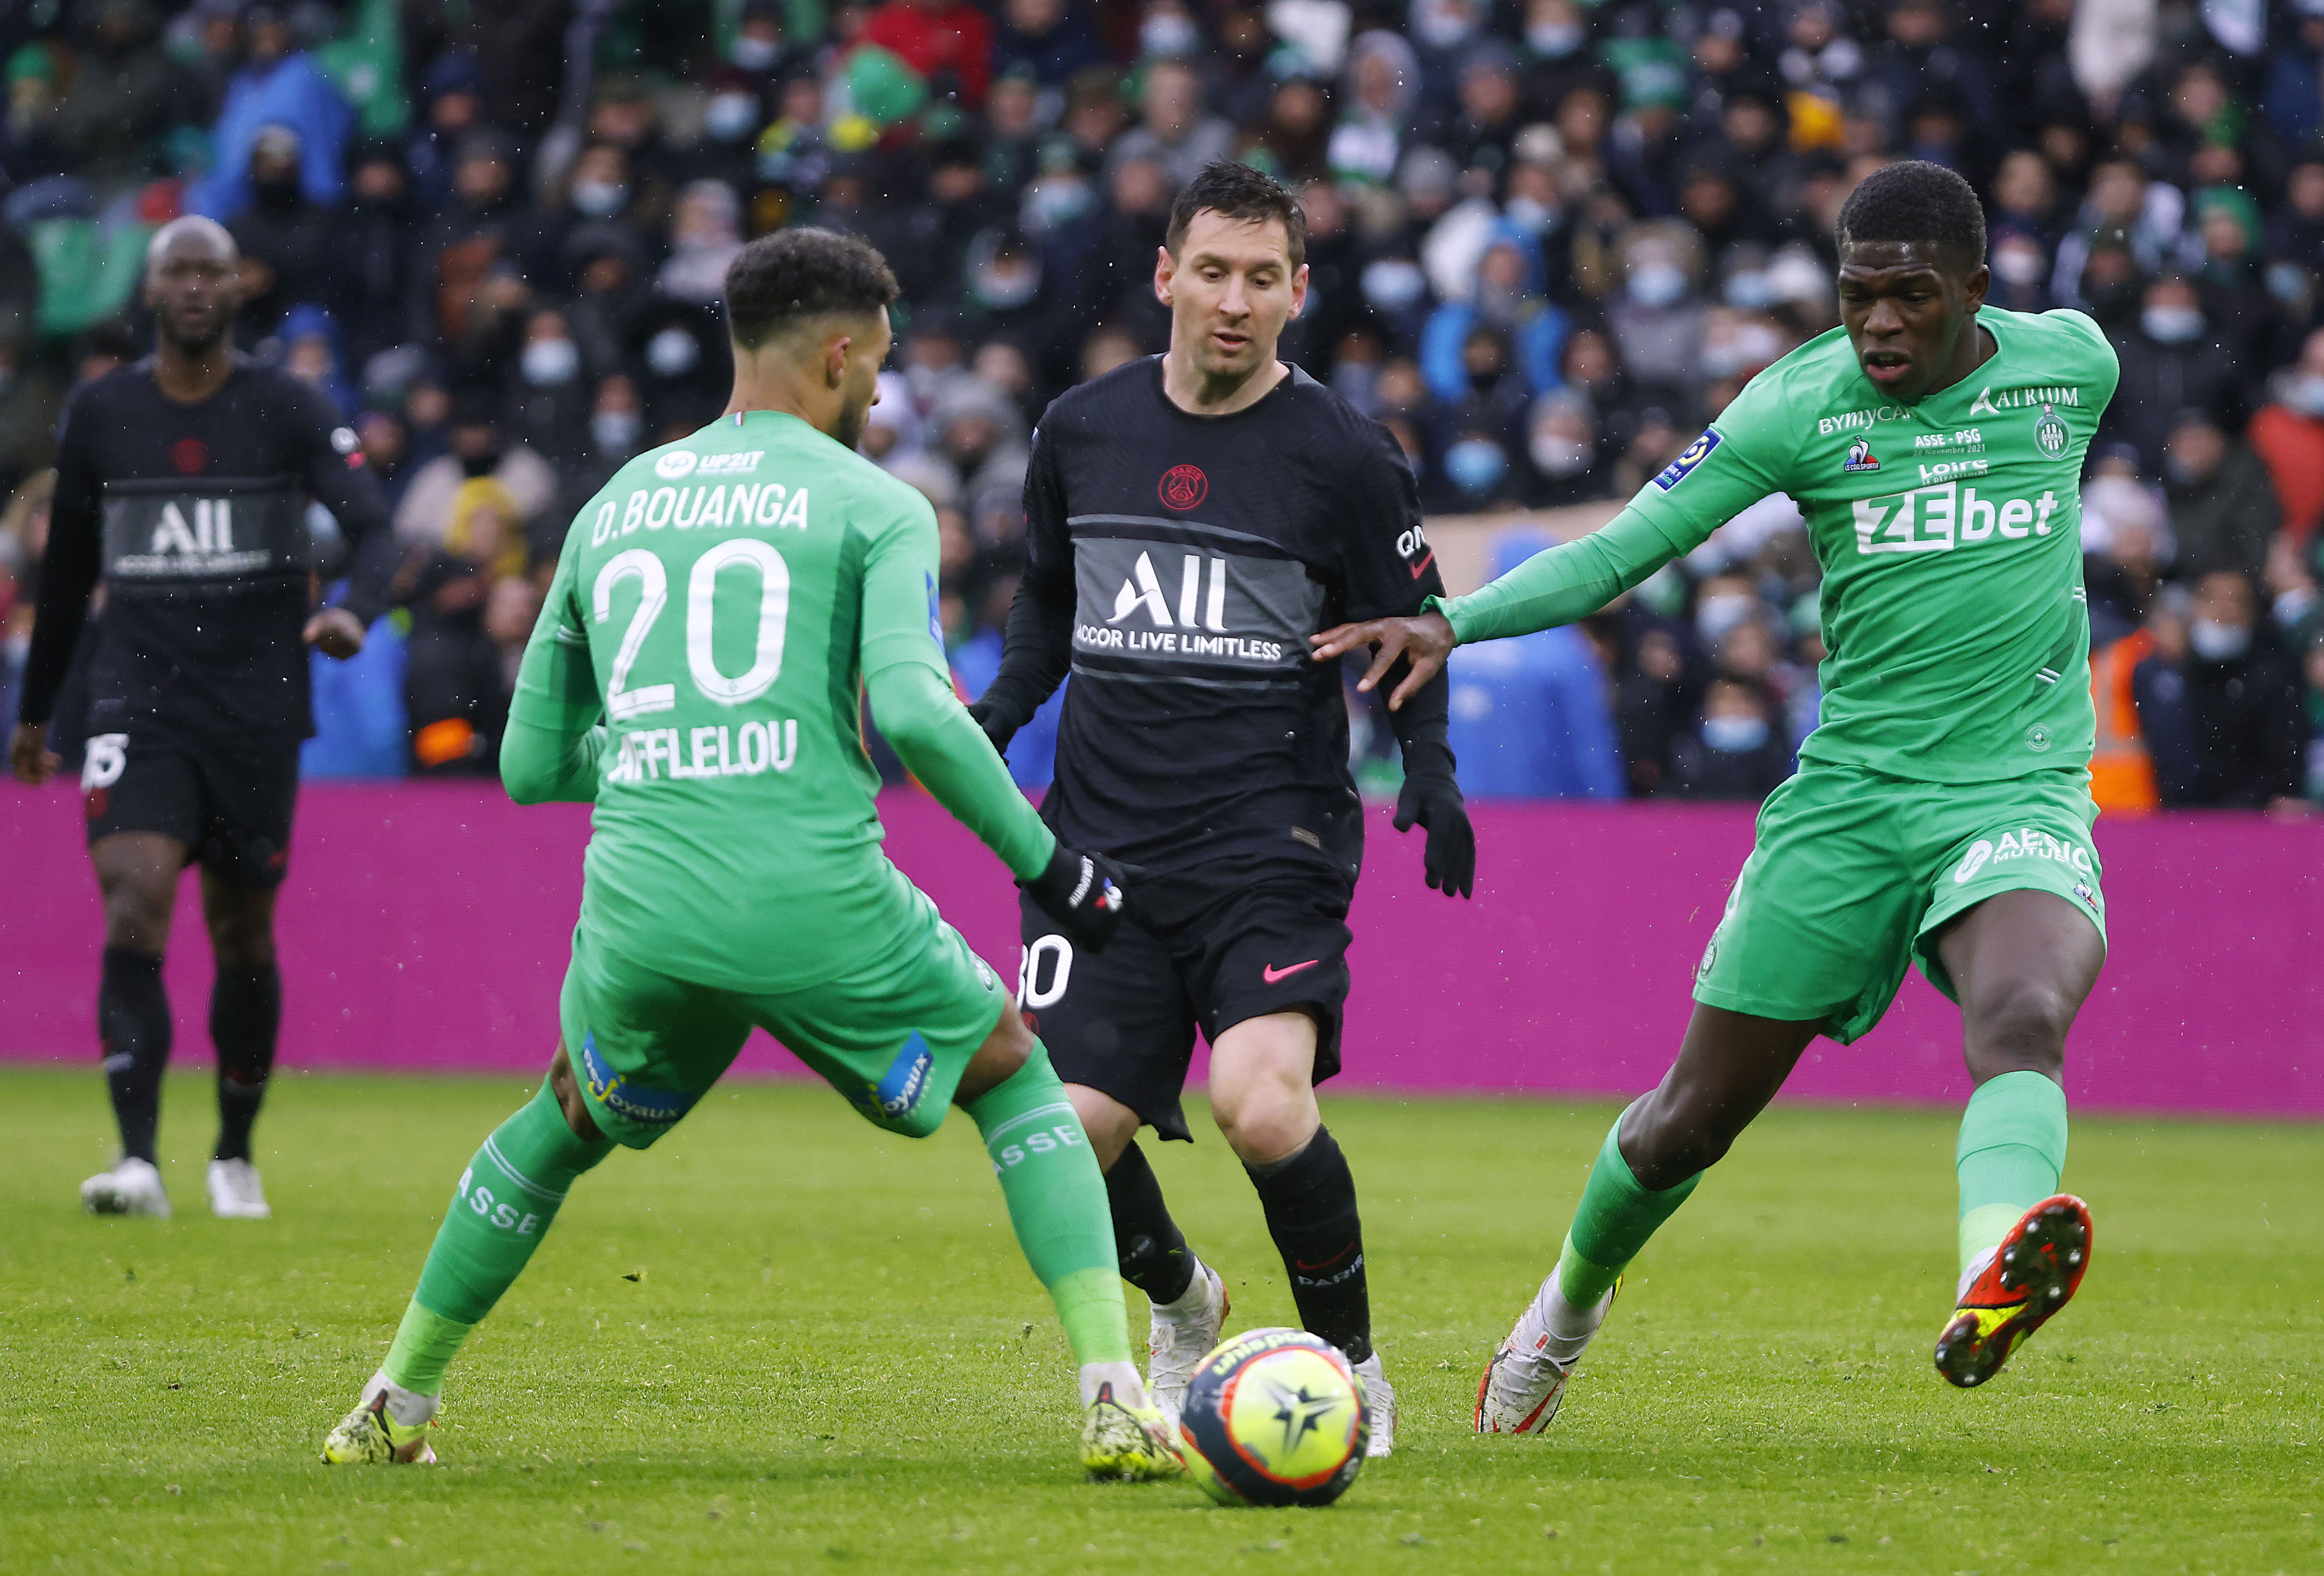 PSG - Saint-Etienne Live Stream, Odds & Lineups for the Ligue 1 Match | February 26